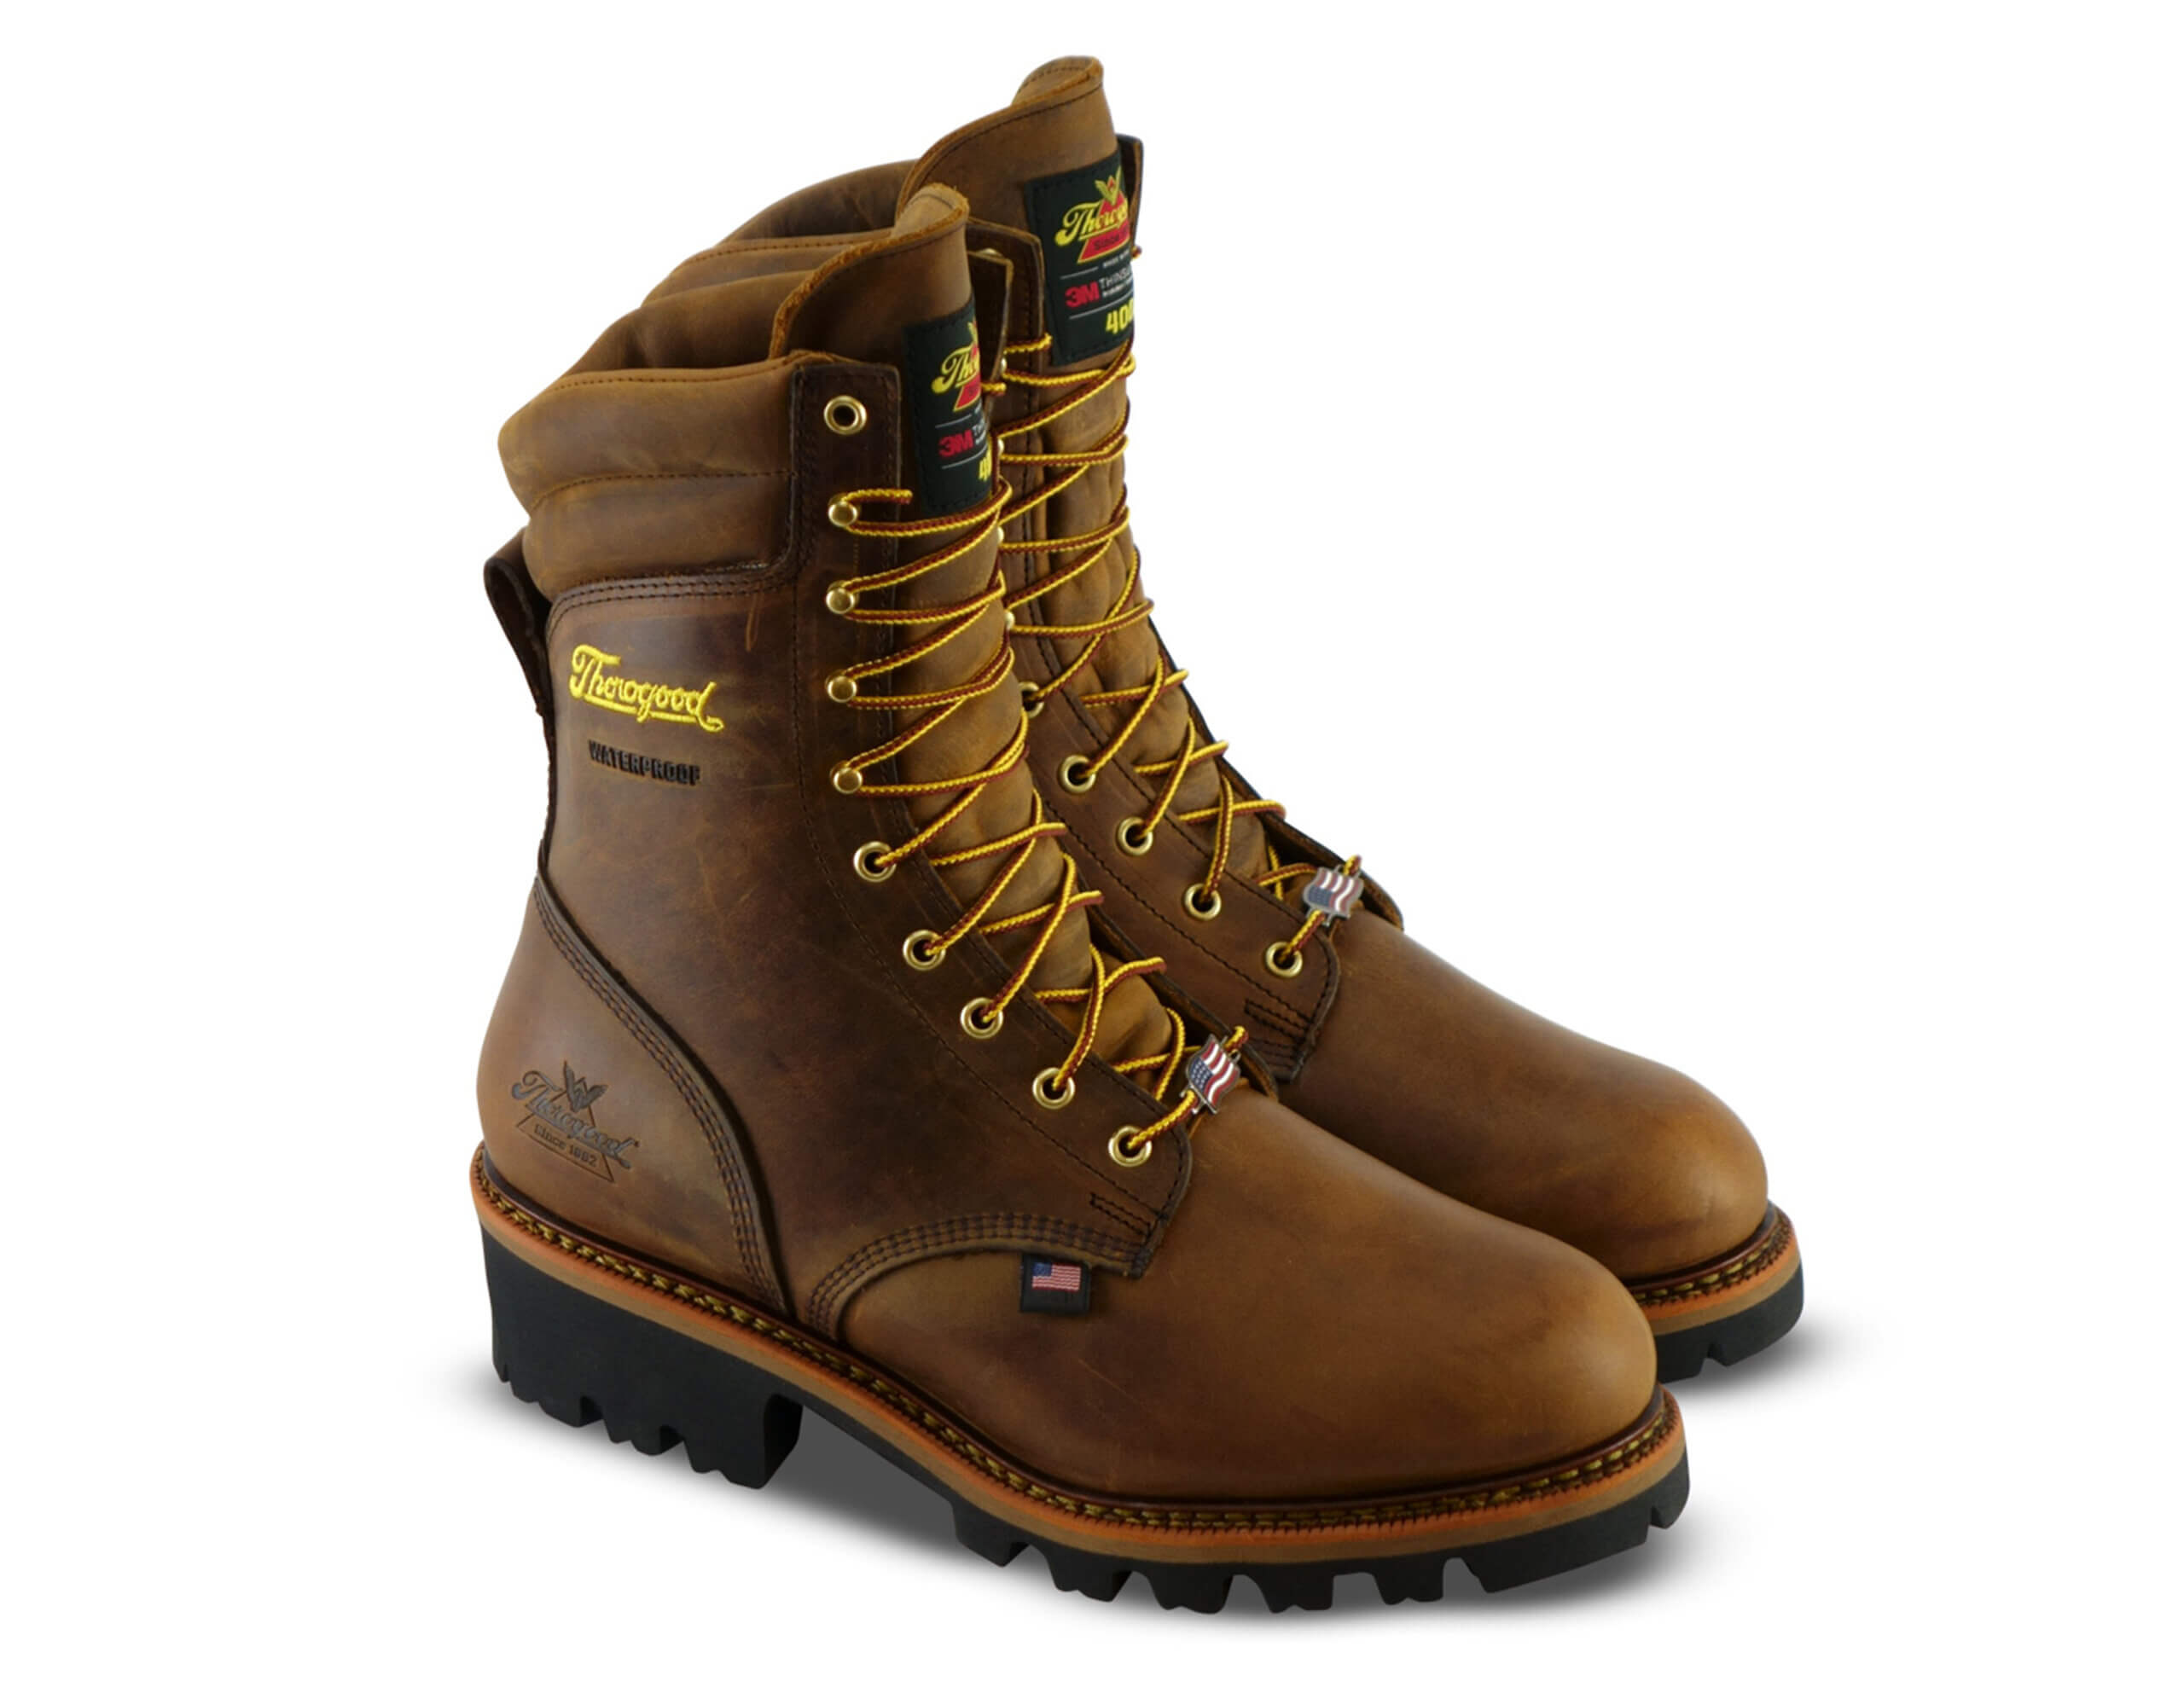 Logger 9" Waterproof + Insulated Vibram Outsole